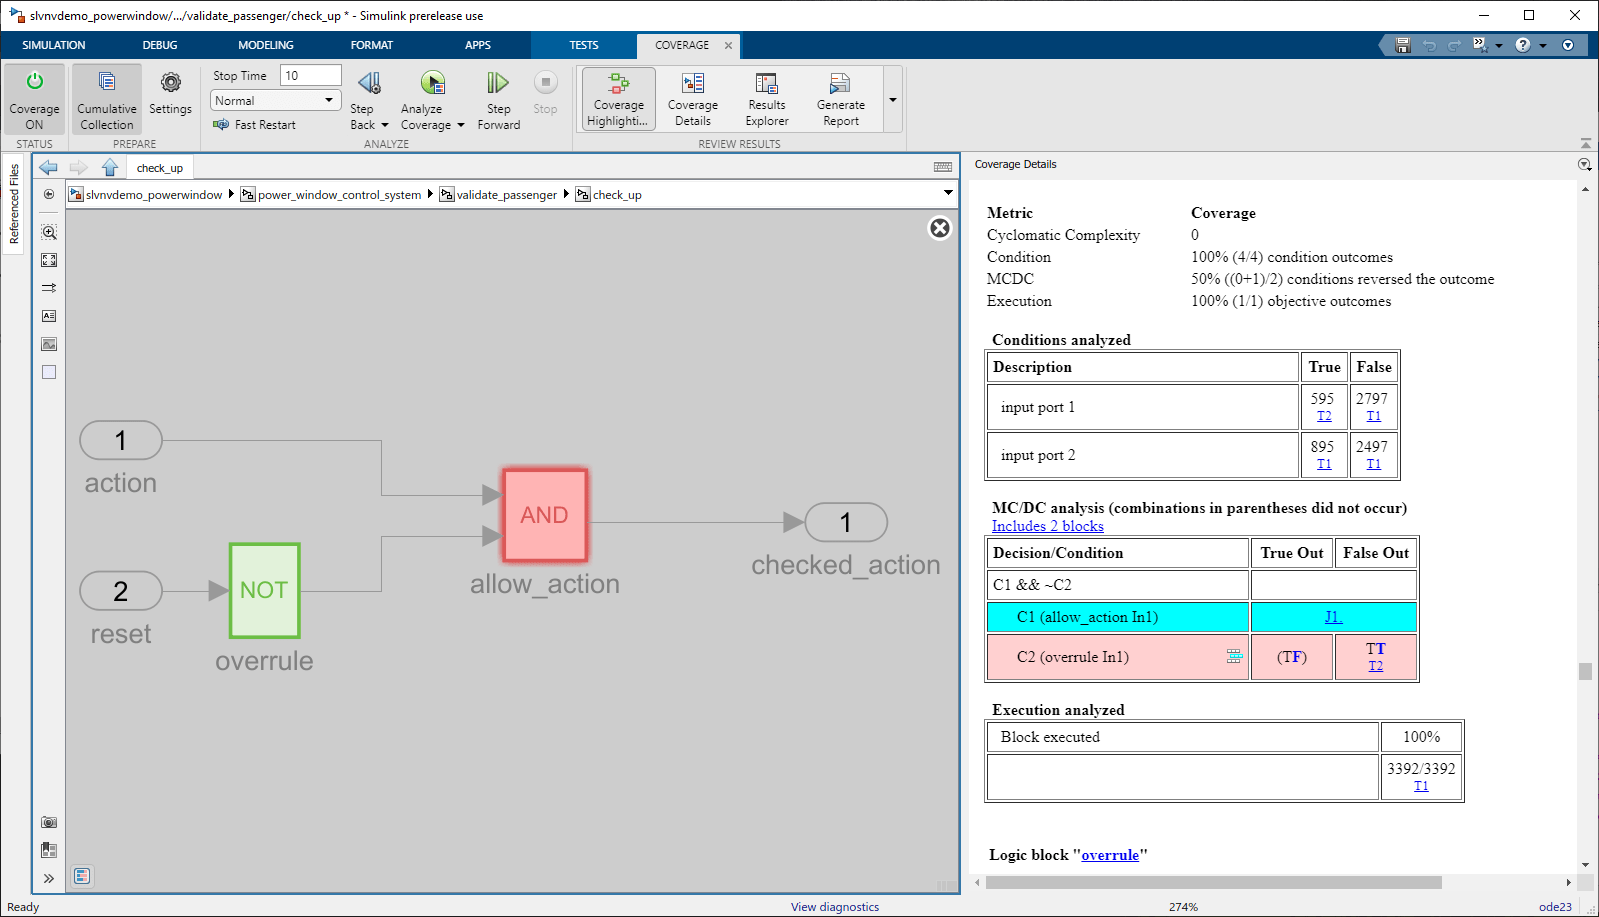 Simulink window after clicking on the And block. The docked coverage report shows the section of the report that details coverage results for the And block, and the C1 MCDC outcome is highlighted cyan to indicate that it is justified.